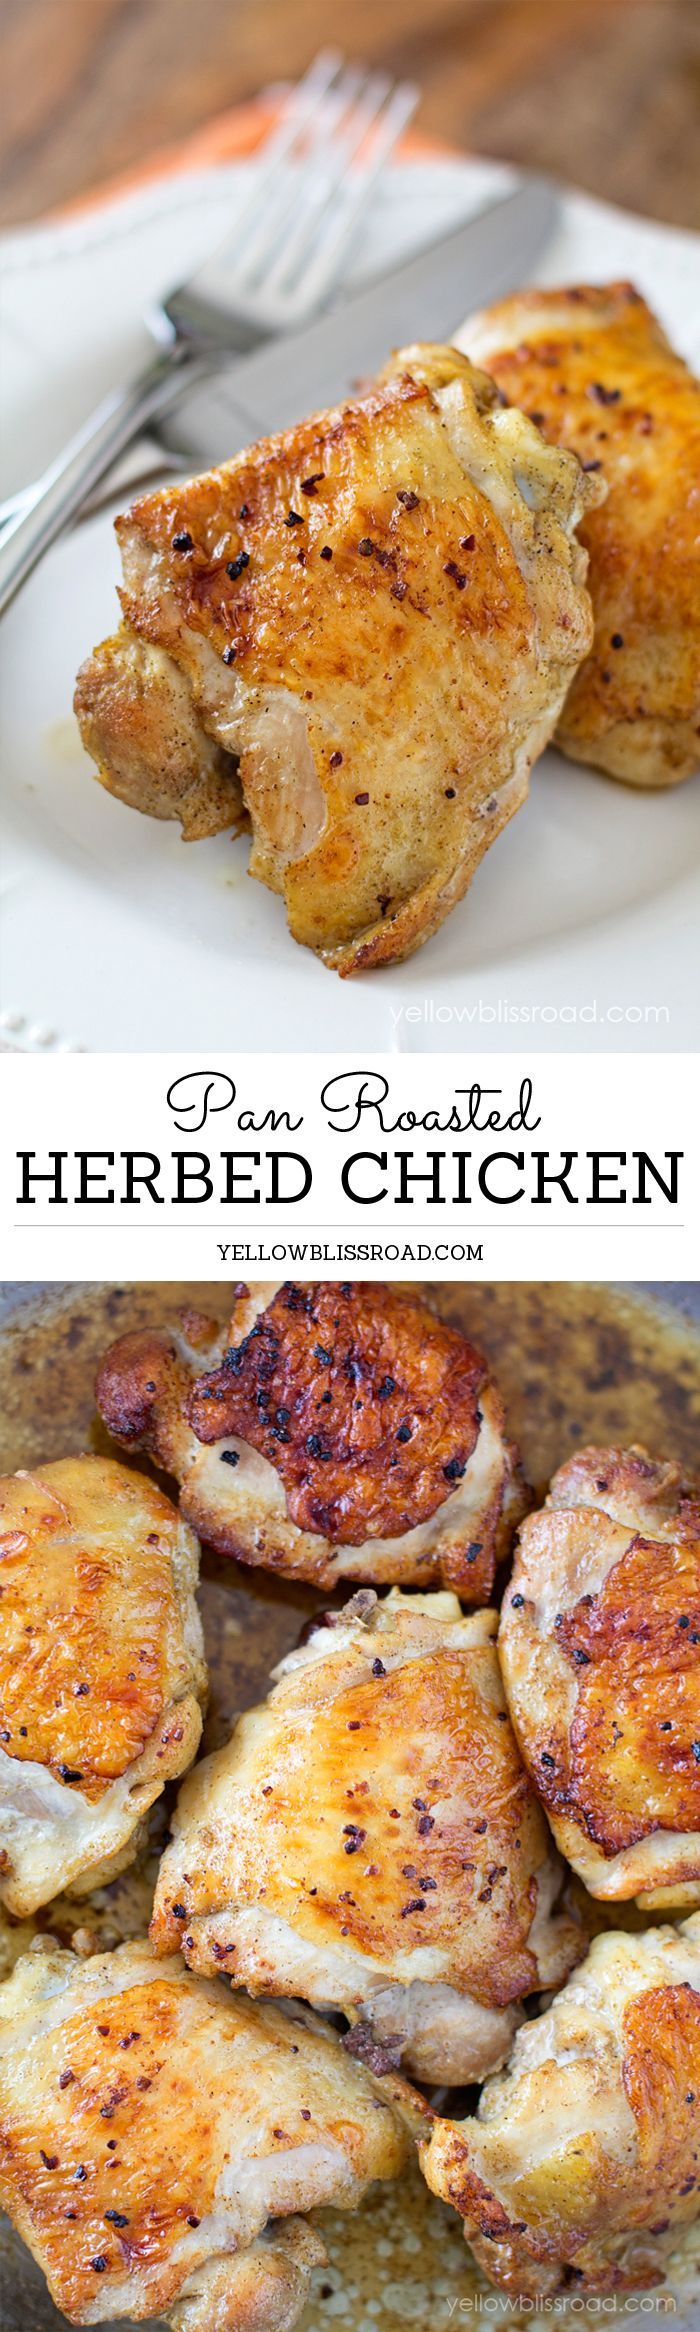 Pan Roasted Herbed Ckicken, deliciously savory and so easy to make. For an MRC menu use chicken